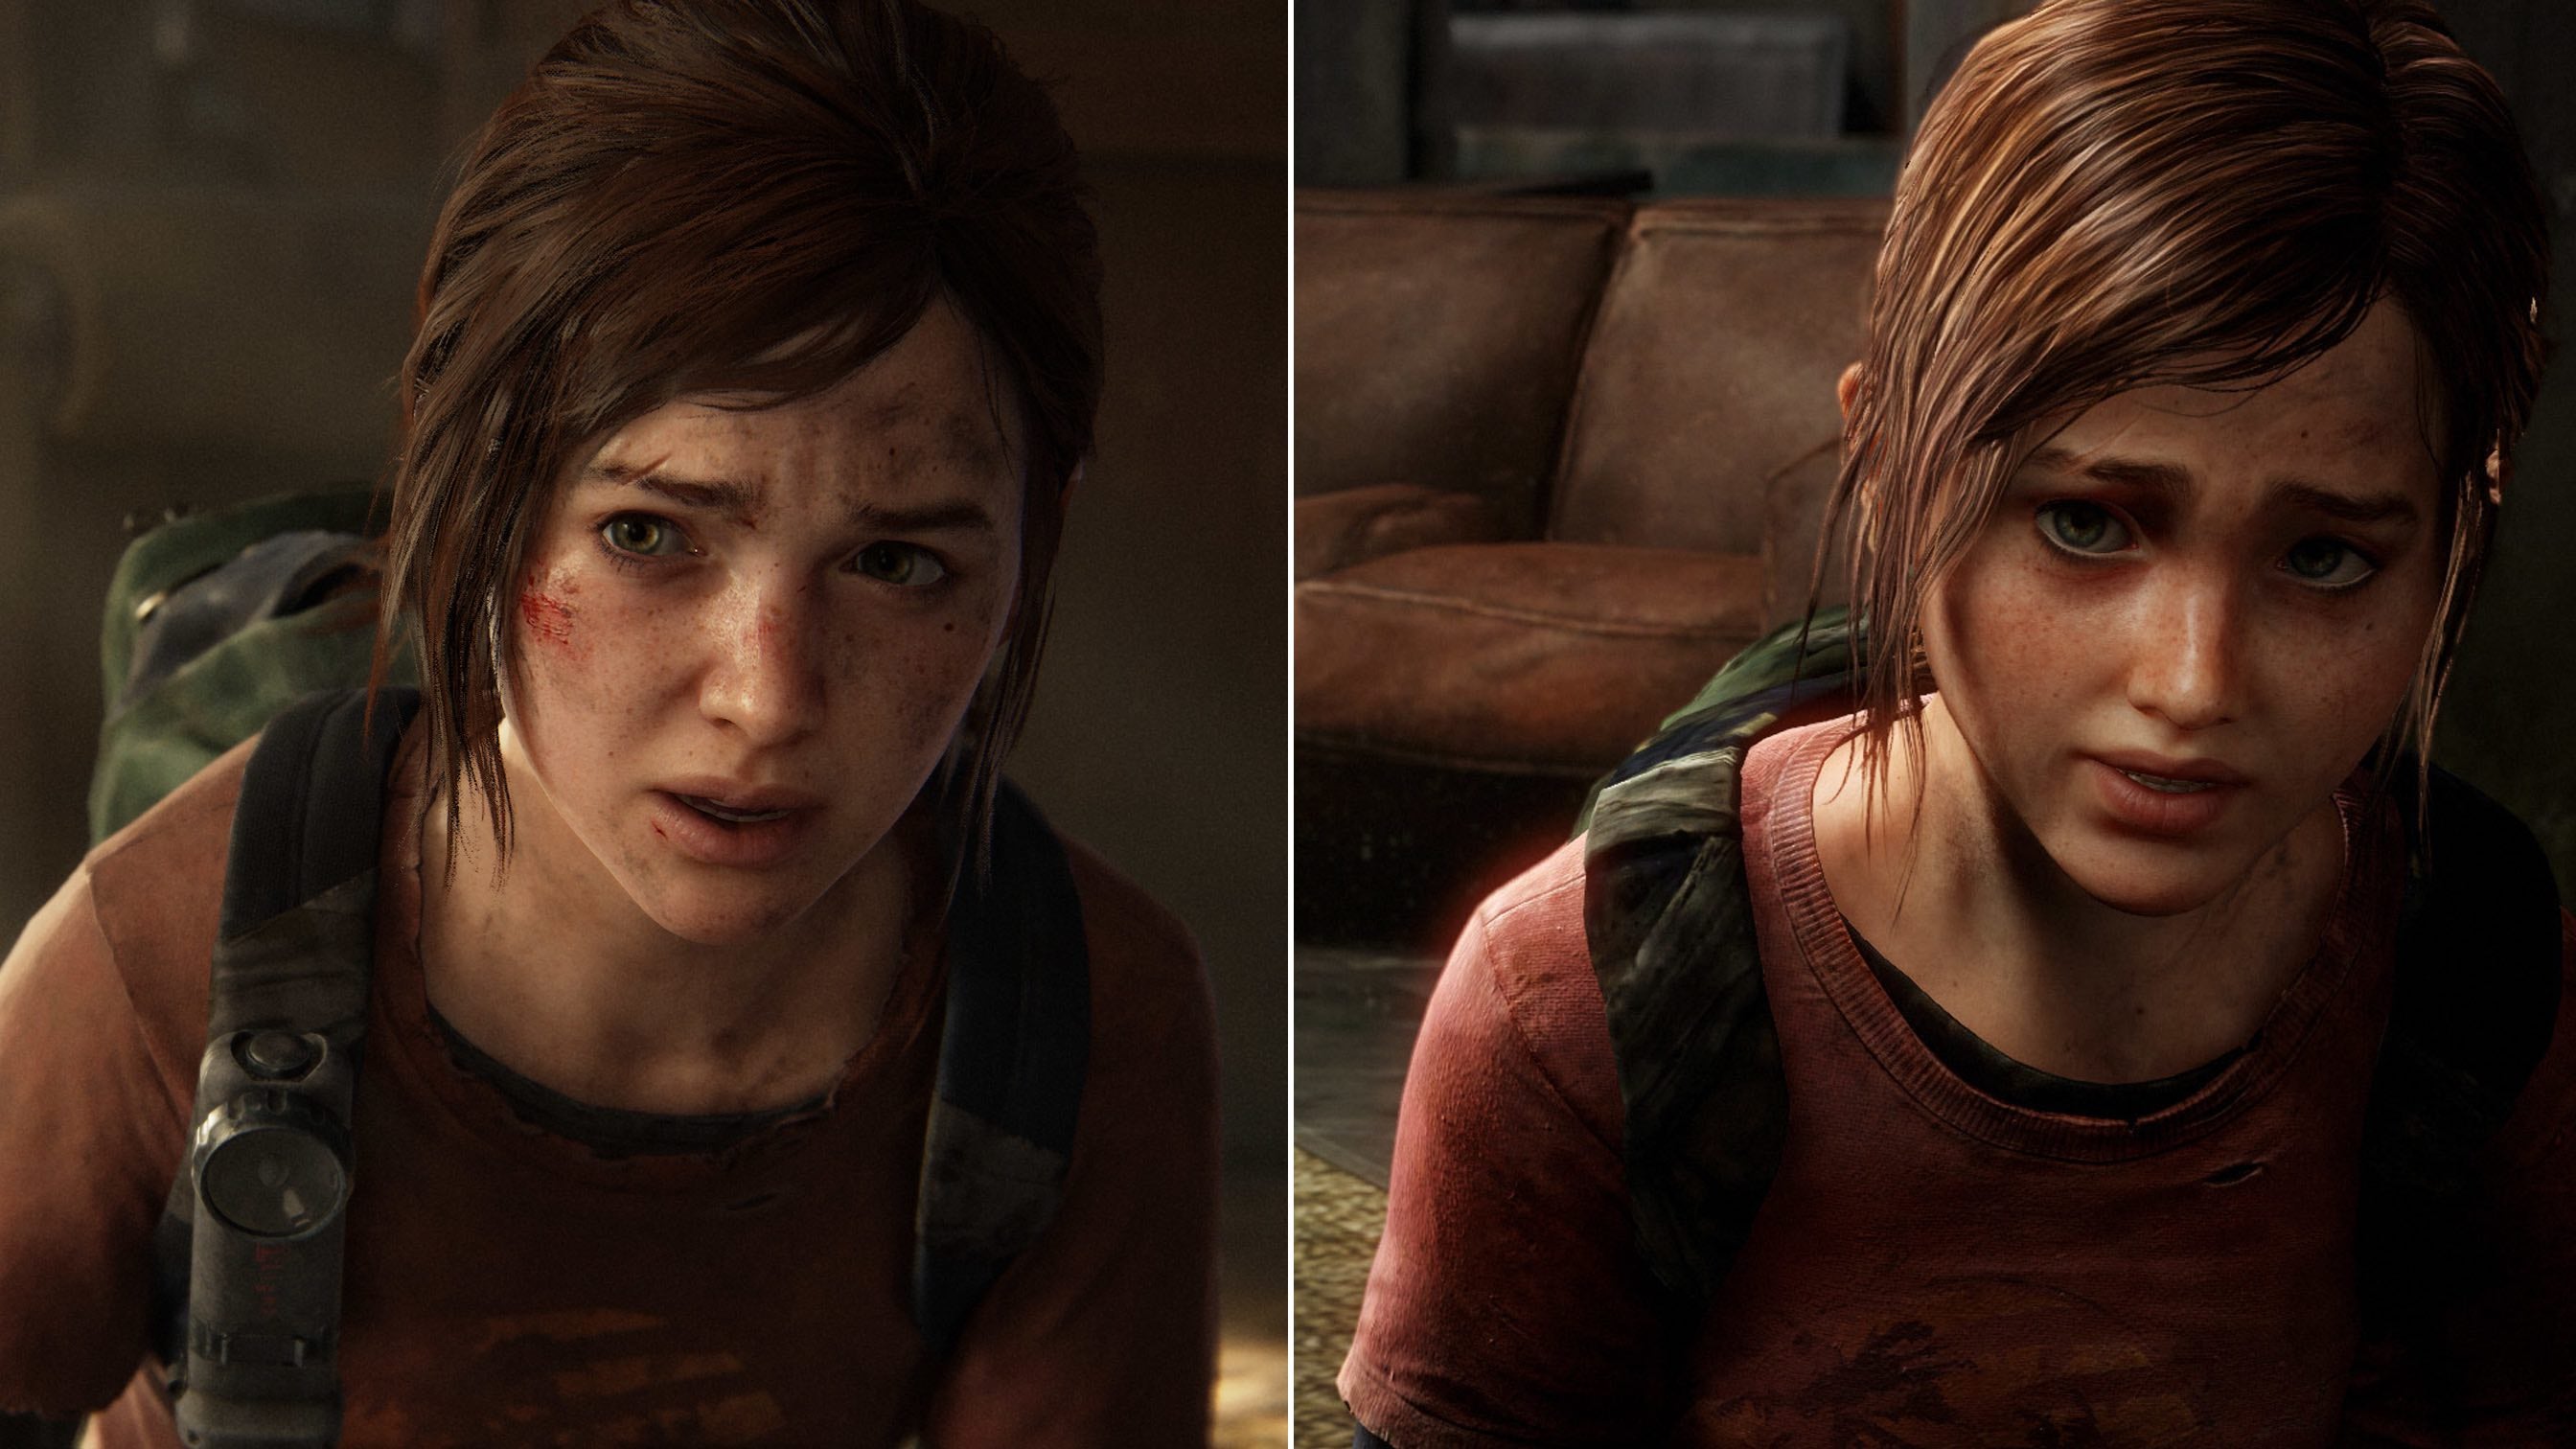 The Last of Us remake is coming to PS5, according to report